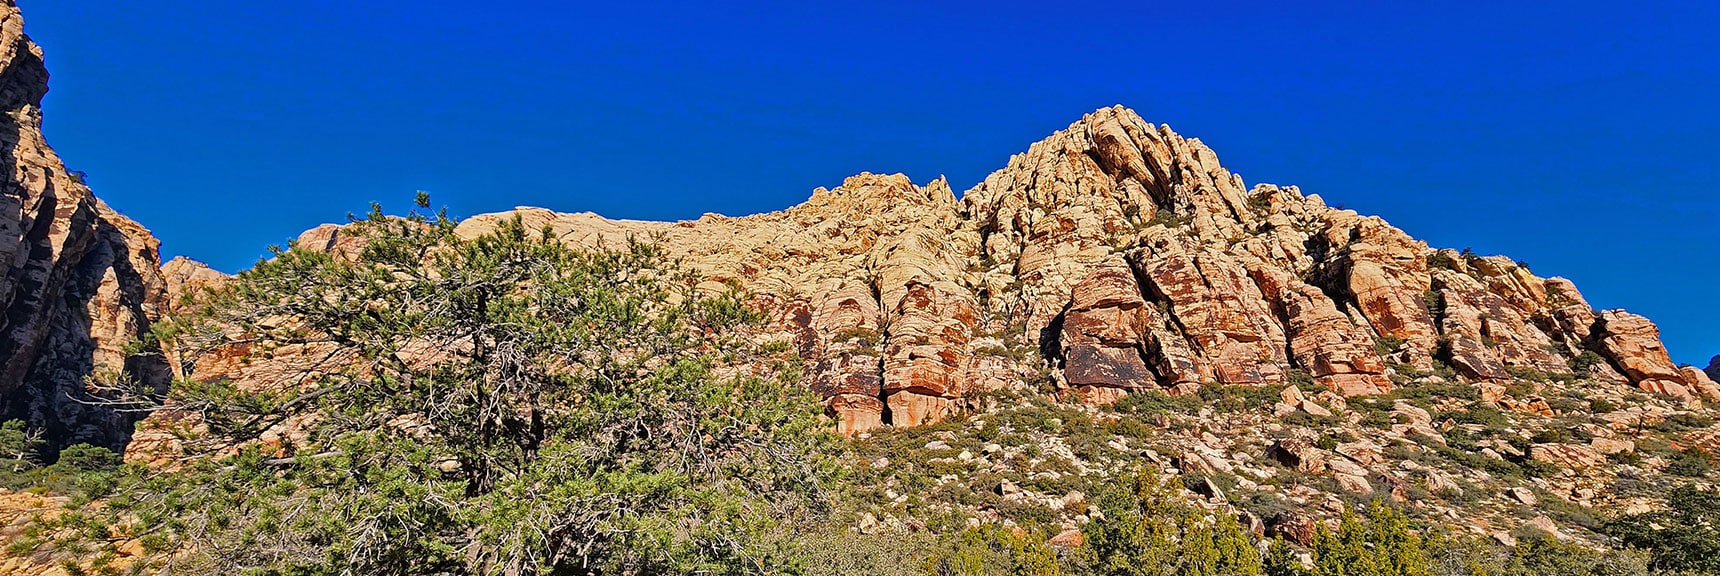 Towering Cliffs on North Side of Canyon Opening | Ice Box Canyon | Red Rock Canyon NCA, Nevada | Las Vegas Area Trails | David Smith